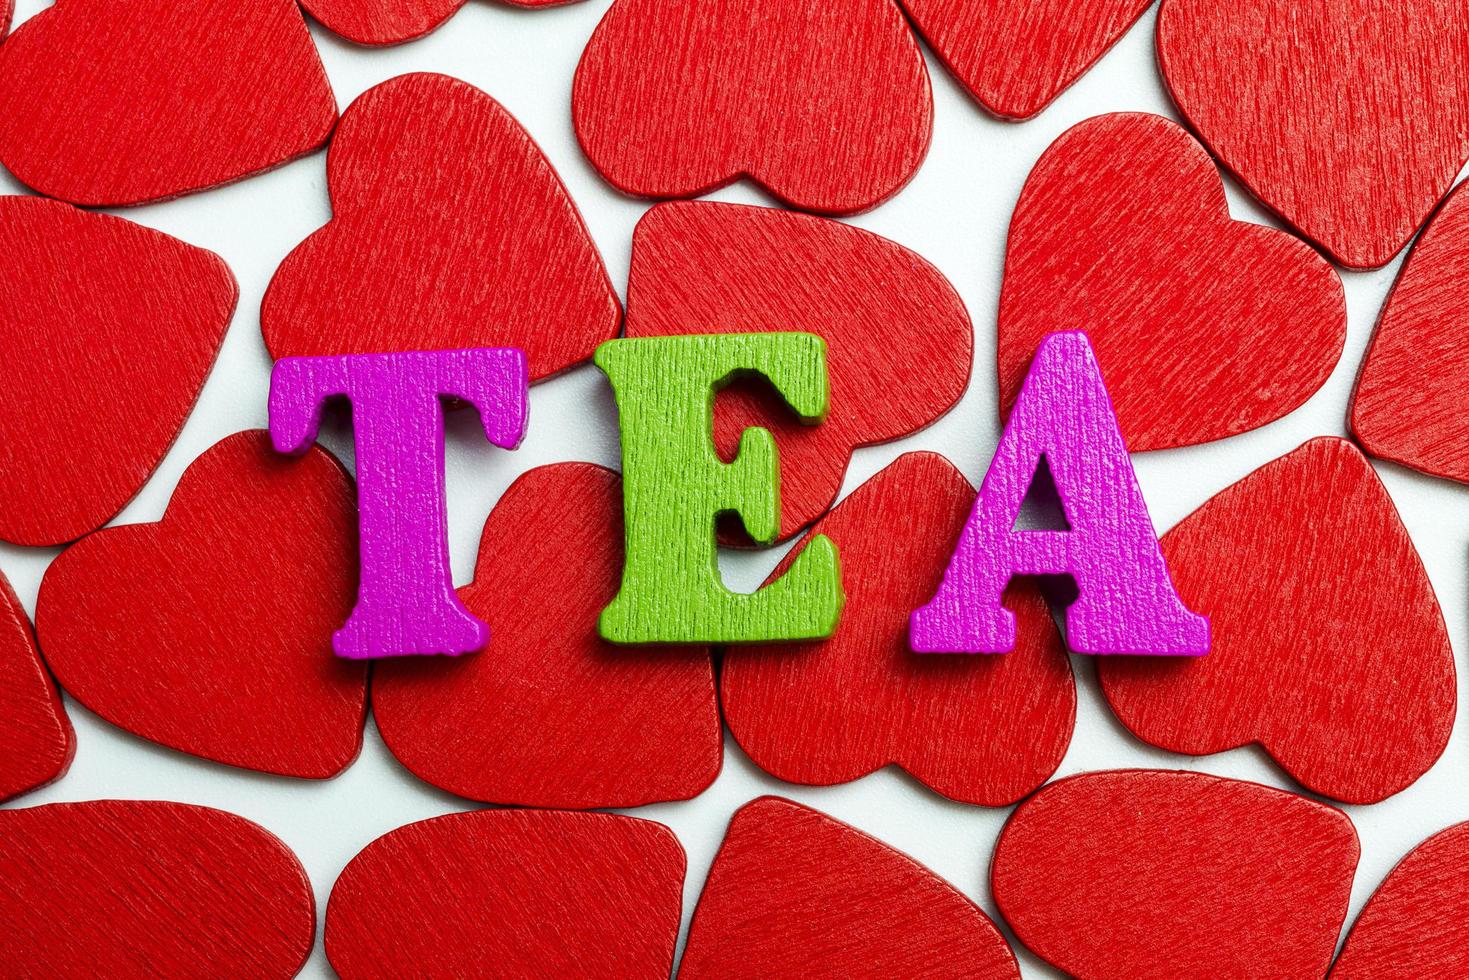 The word tea is laid out on the hearts. photo